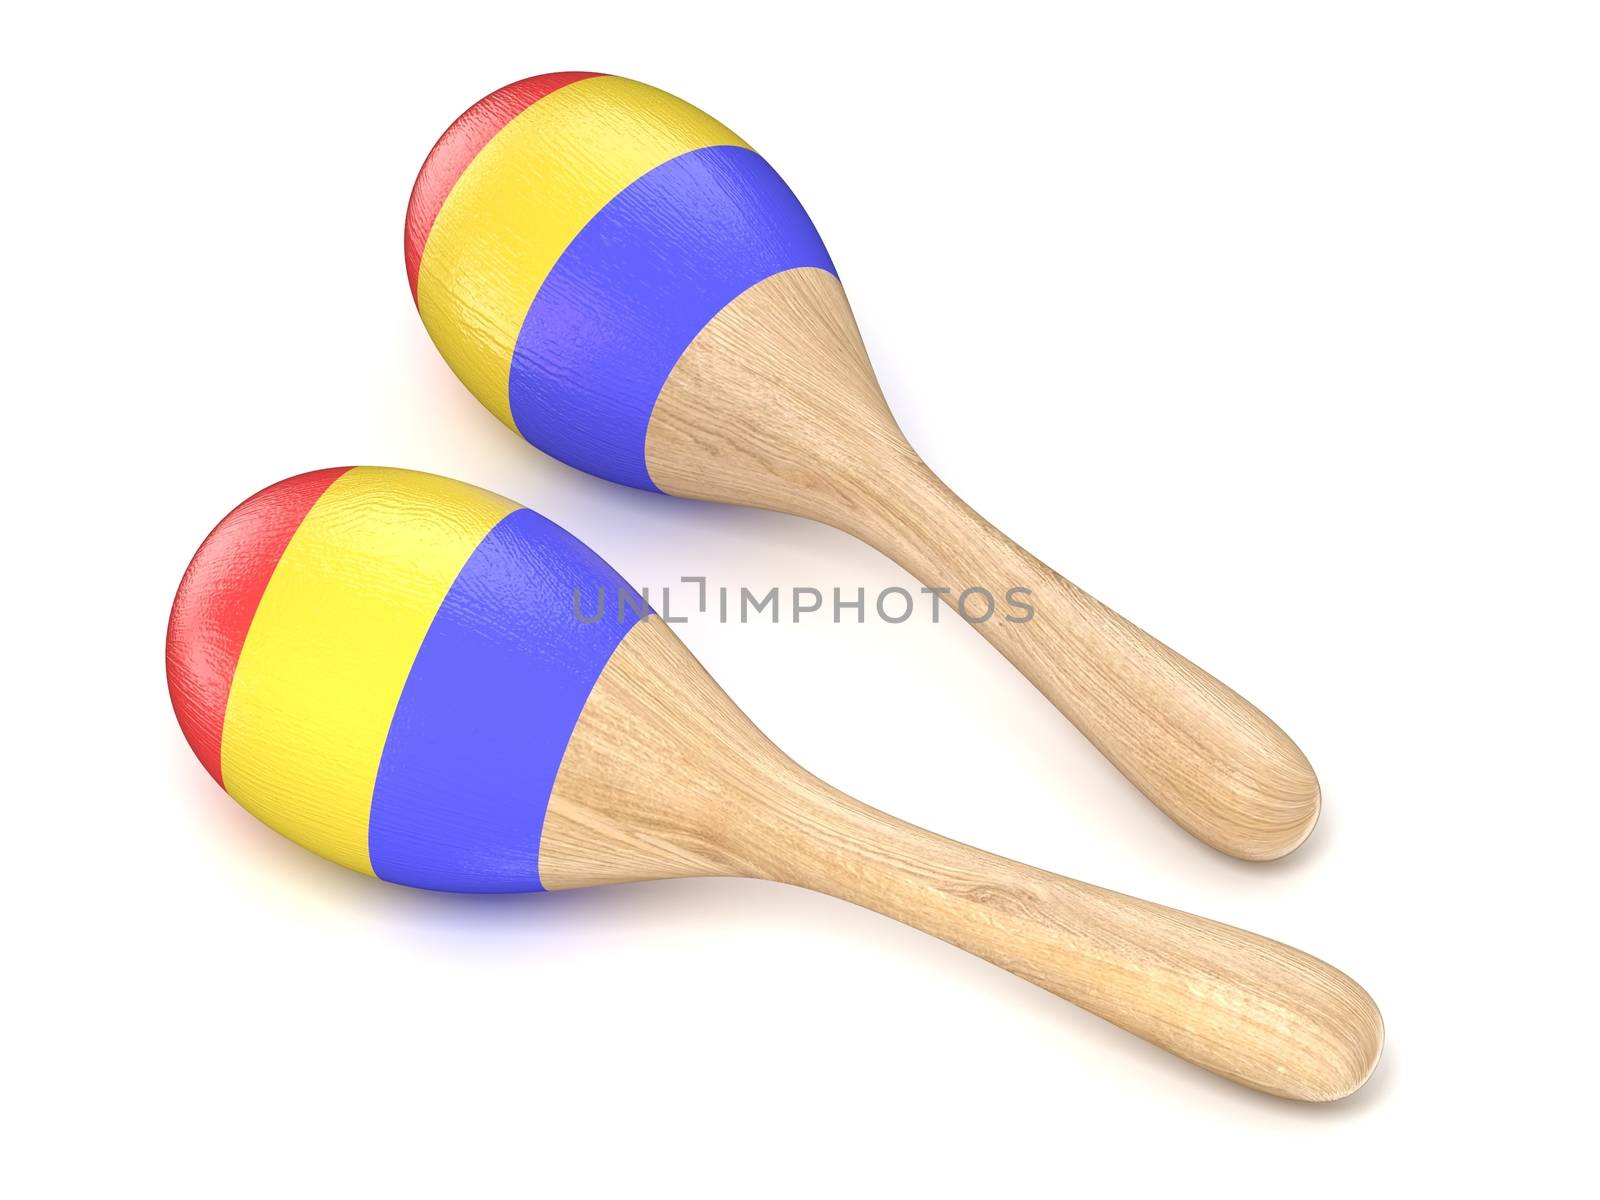 Wooden toy maracas. 3D render illustration isolated on white background